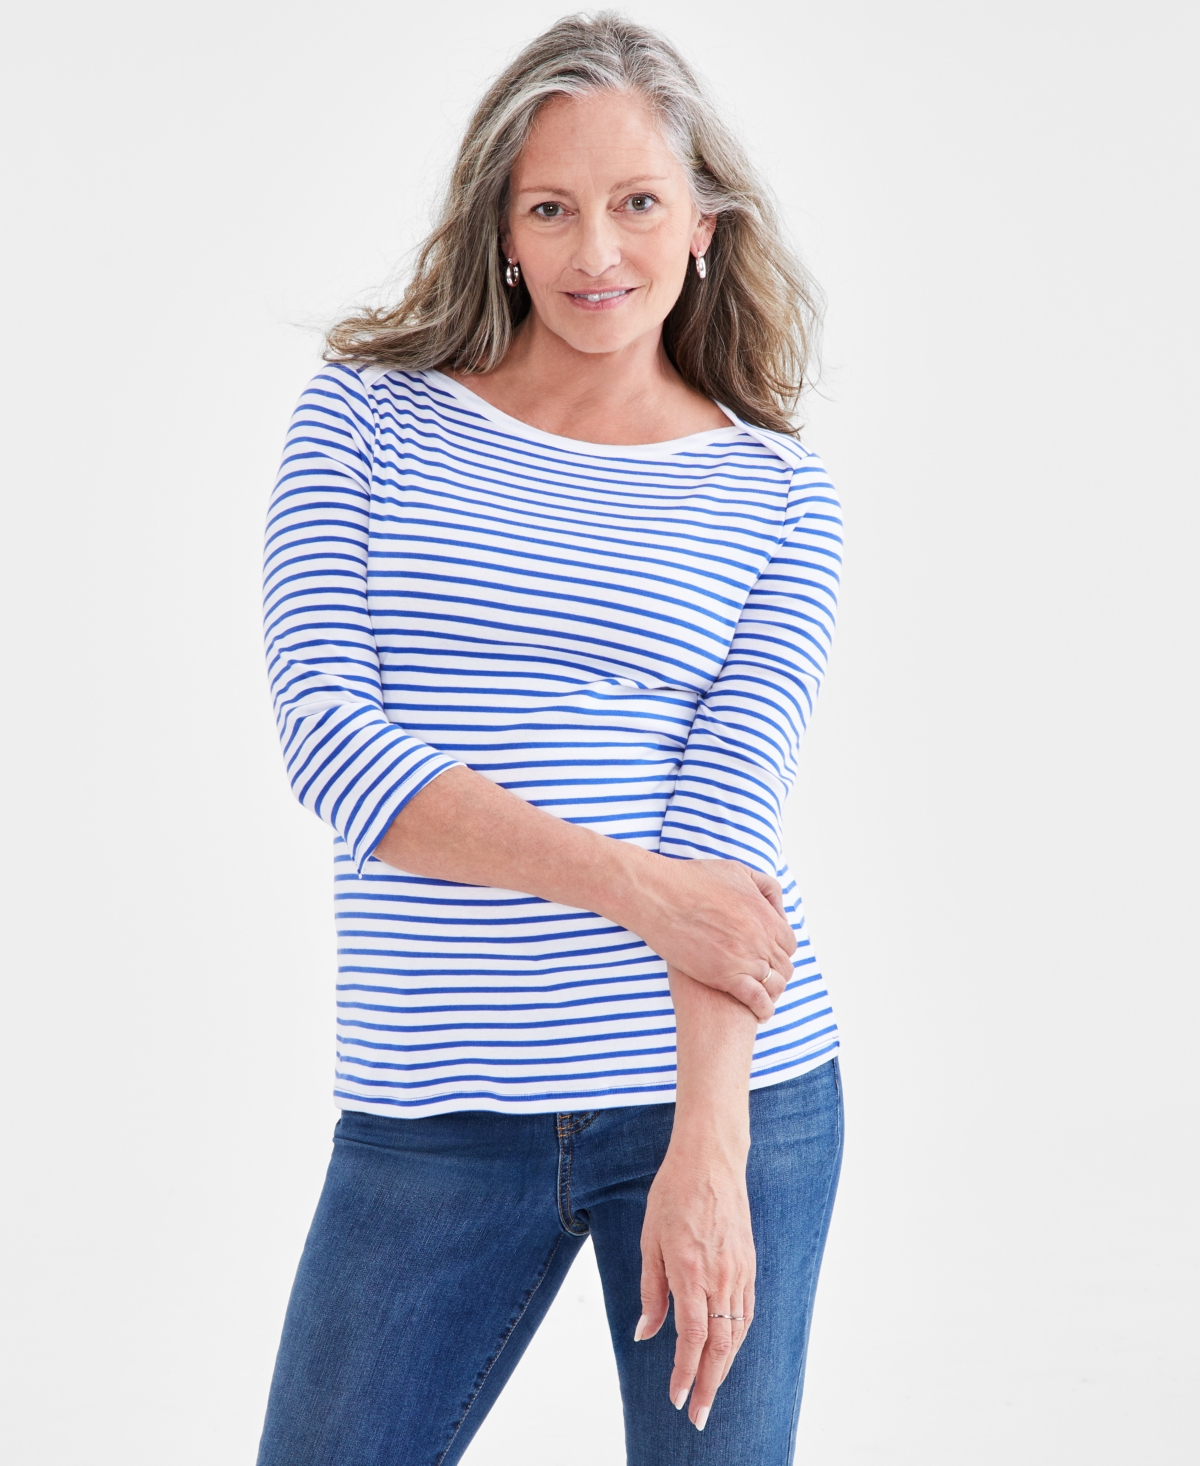 Women's Pima Cotton Striped 3/4-Sleeve Top, Created for Macy's - Blue White Stripe